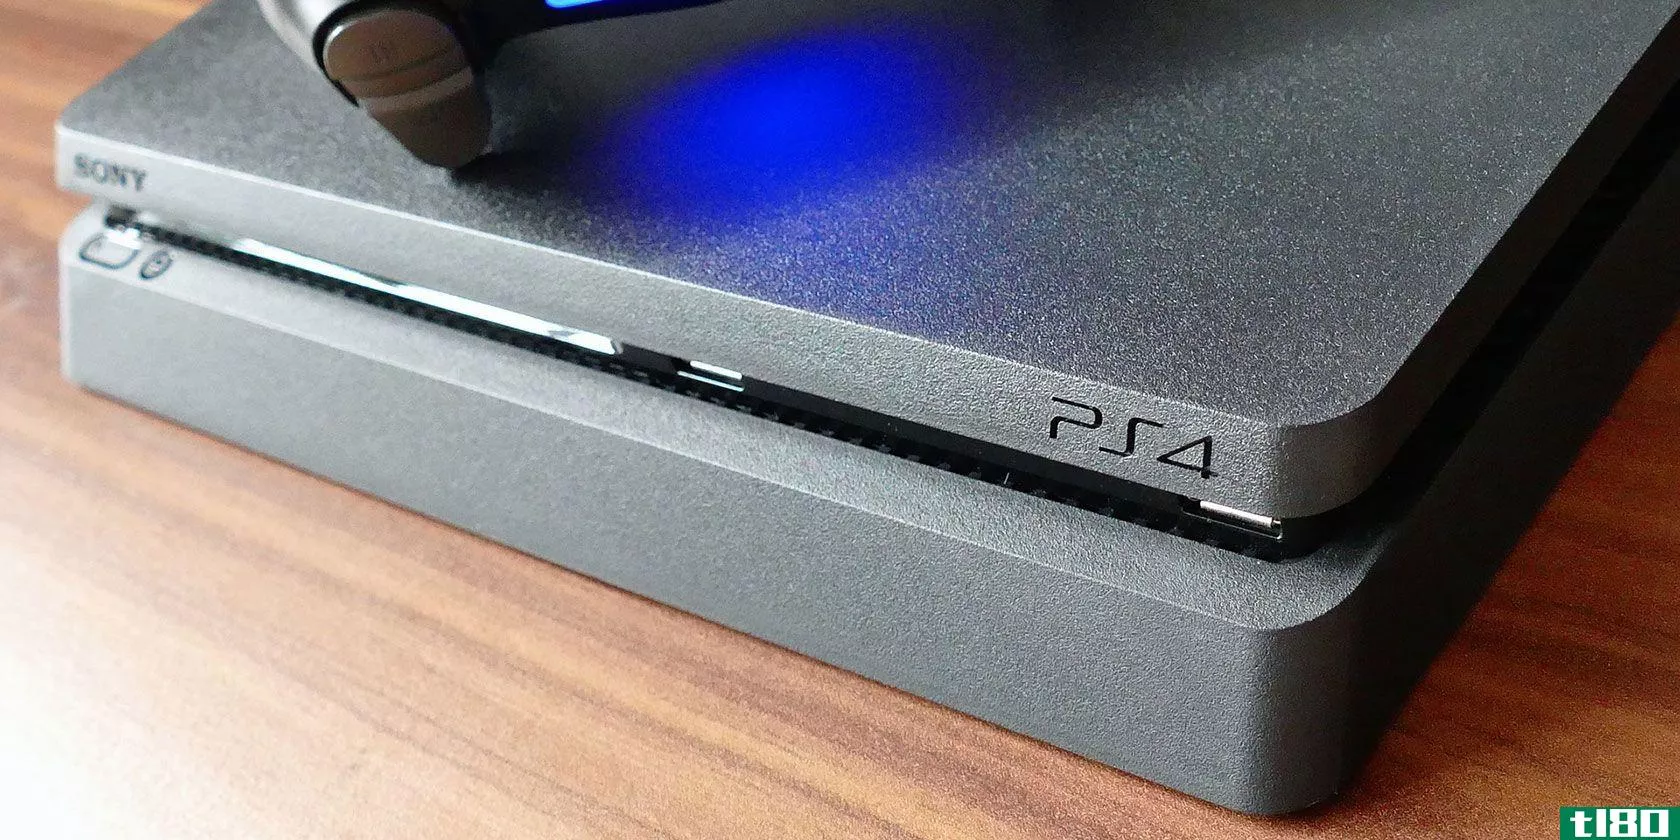 Turn a PS4 off with or without a controller